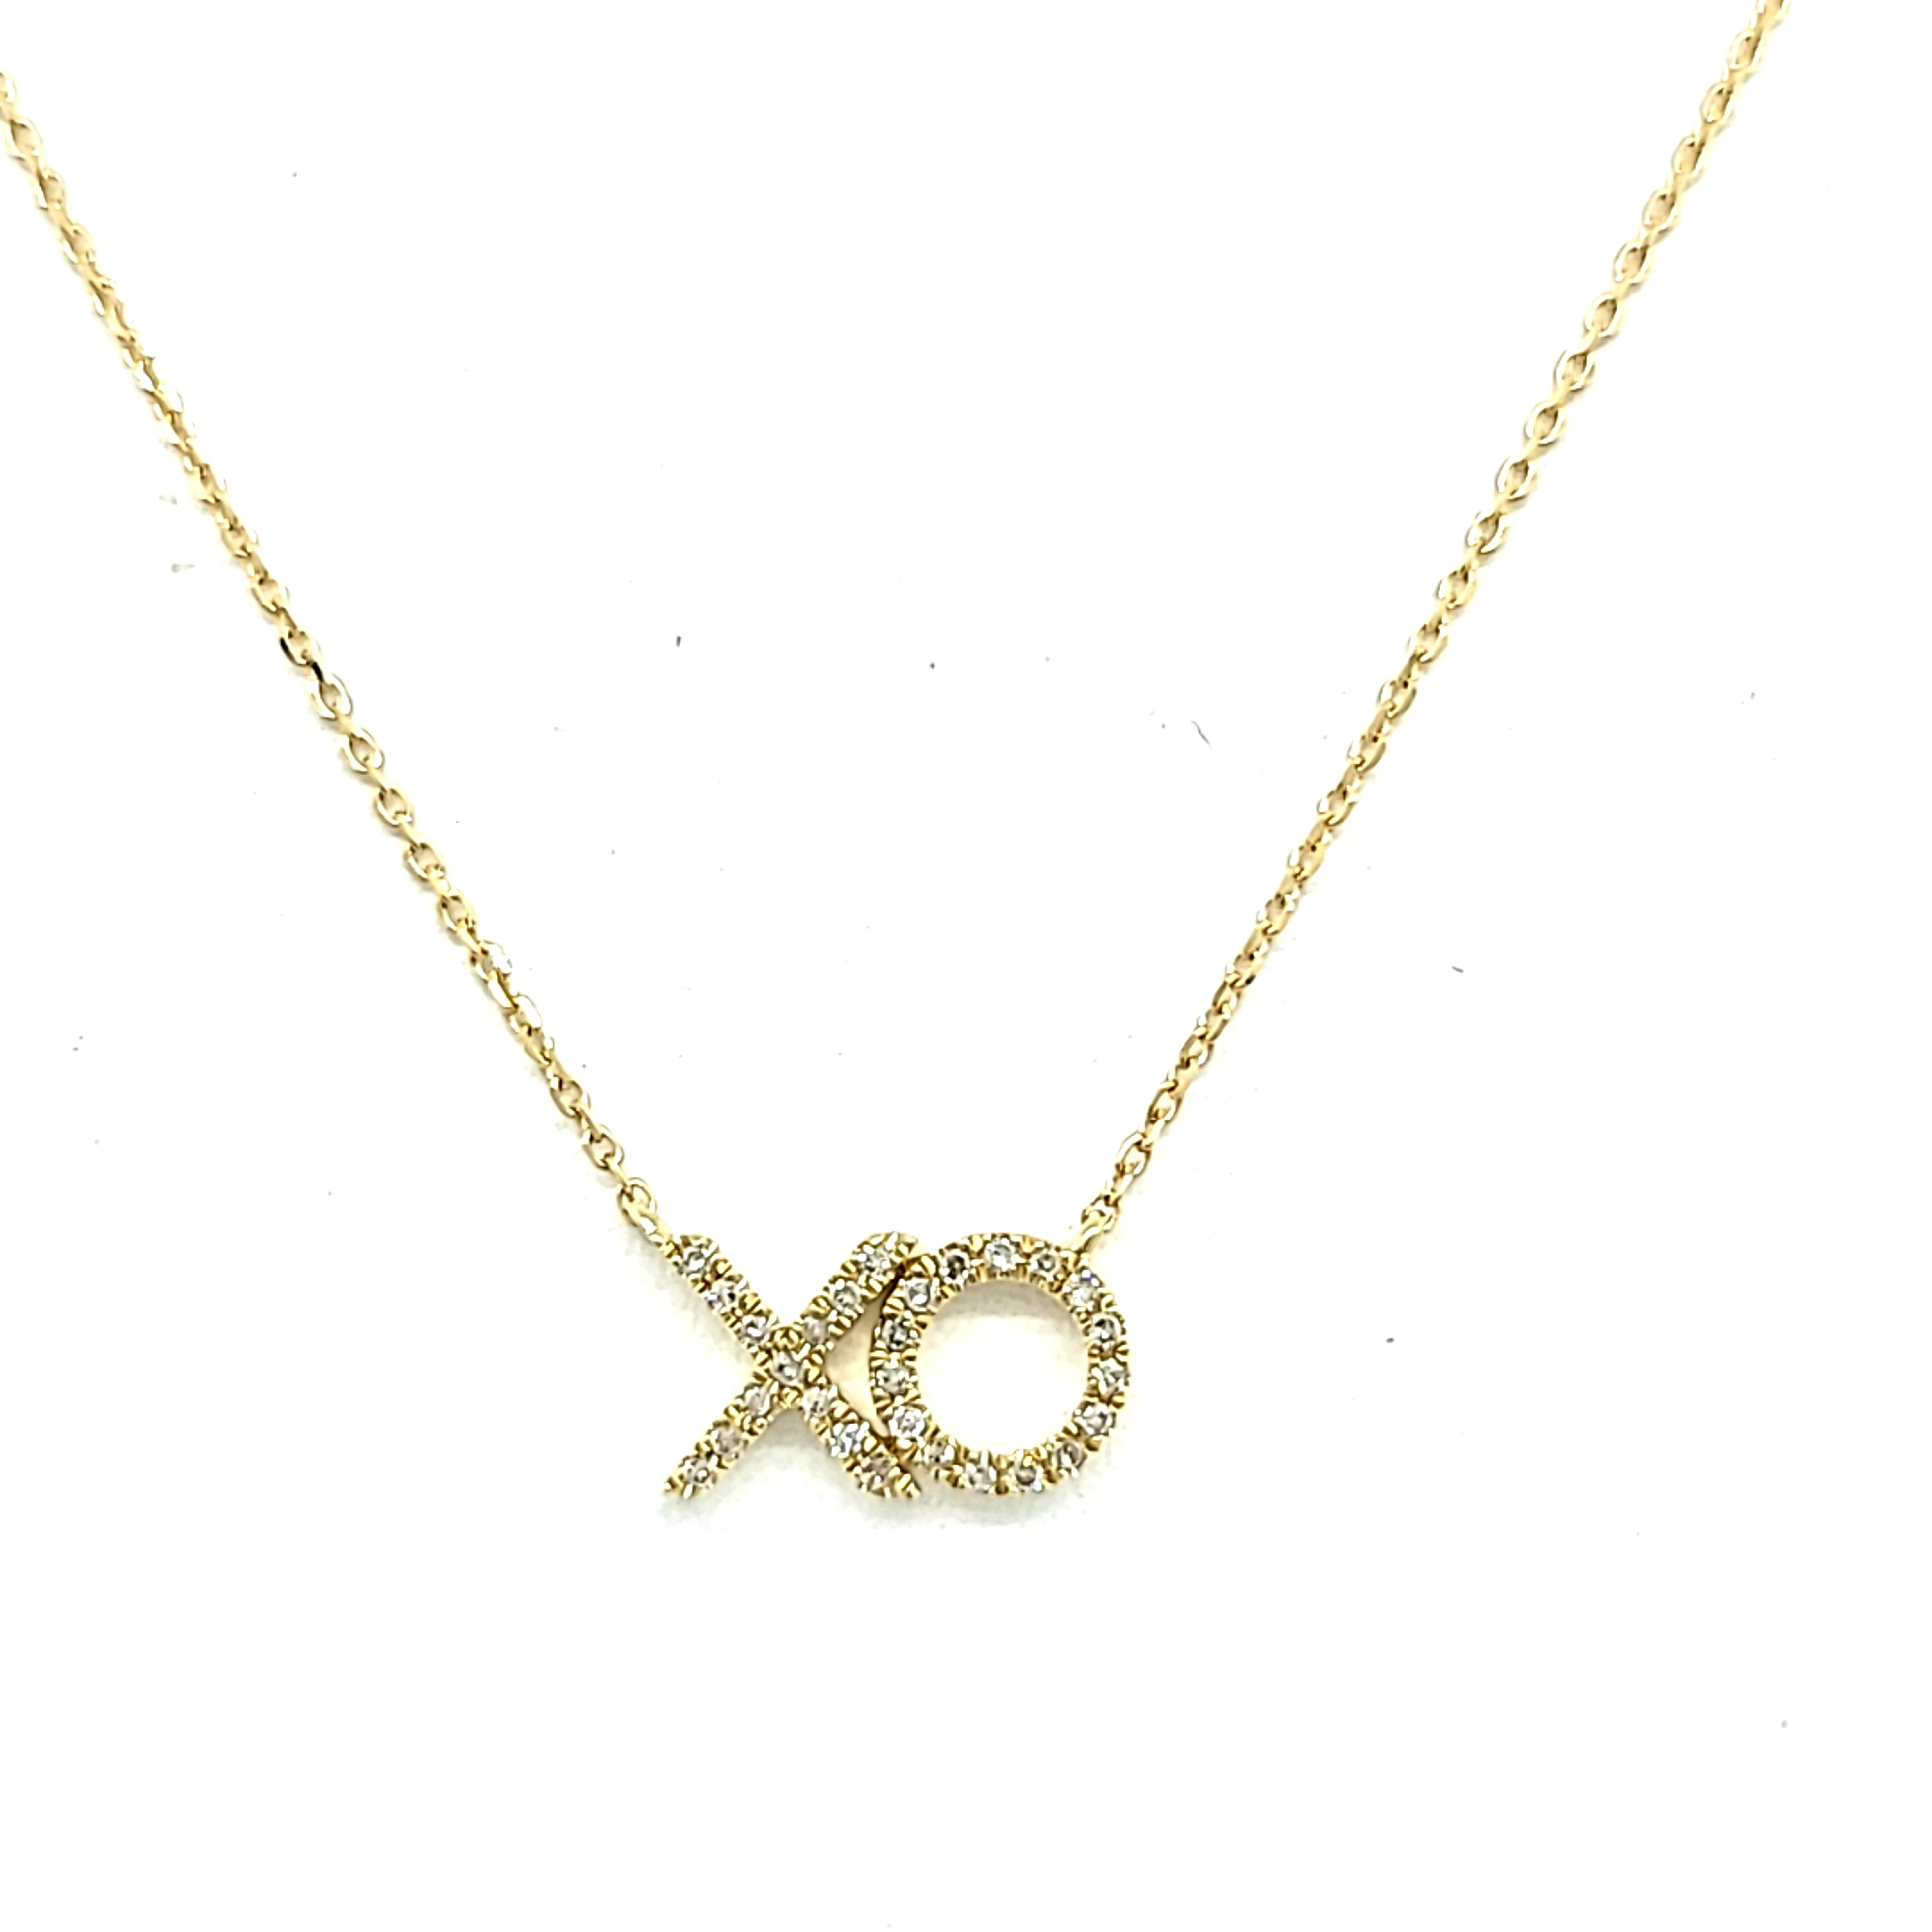 XO Necklace | The Gilded Witch